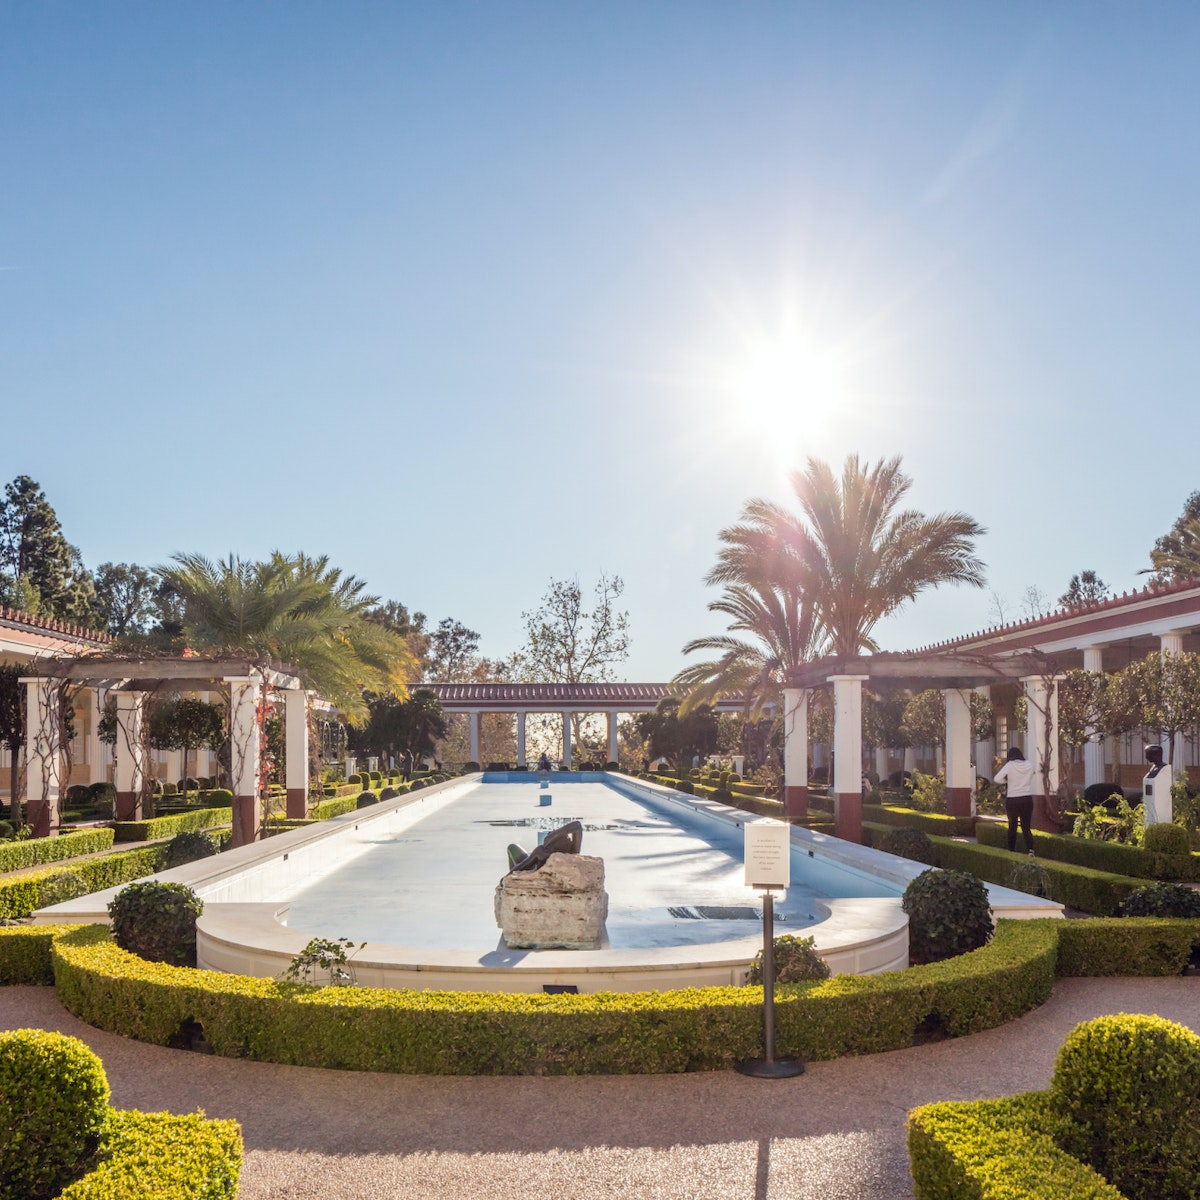 LOS ANGELES, USA - DECEMBER 23 2015: The Getty Villa  is one of two locations of the J. Paul Getty Museum which is dedicated to the study of the arts and cultures of ancient Greece, Rome, and Etruria.; Shutterstock ID 355379339; Your name (First / Last): Josh Vogel; GL account no.: 56530; Netsuite department name: Online Design; Full Product or Project name including edition: Digital Content/Sights